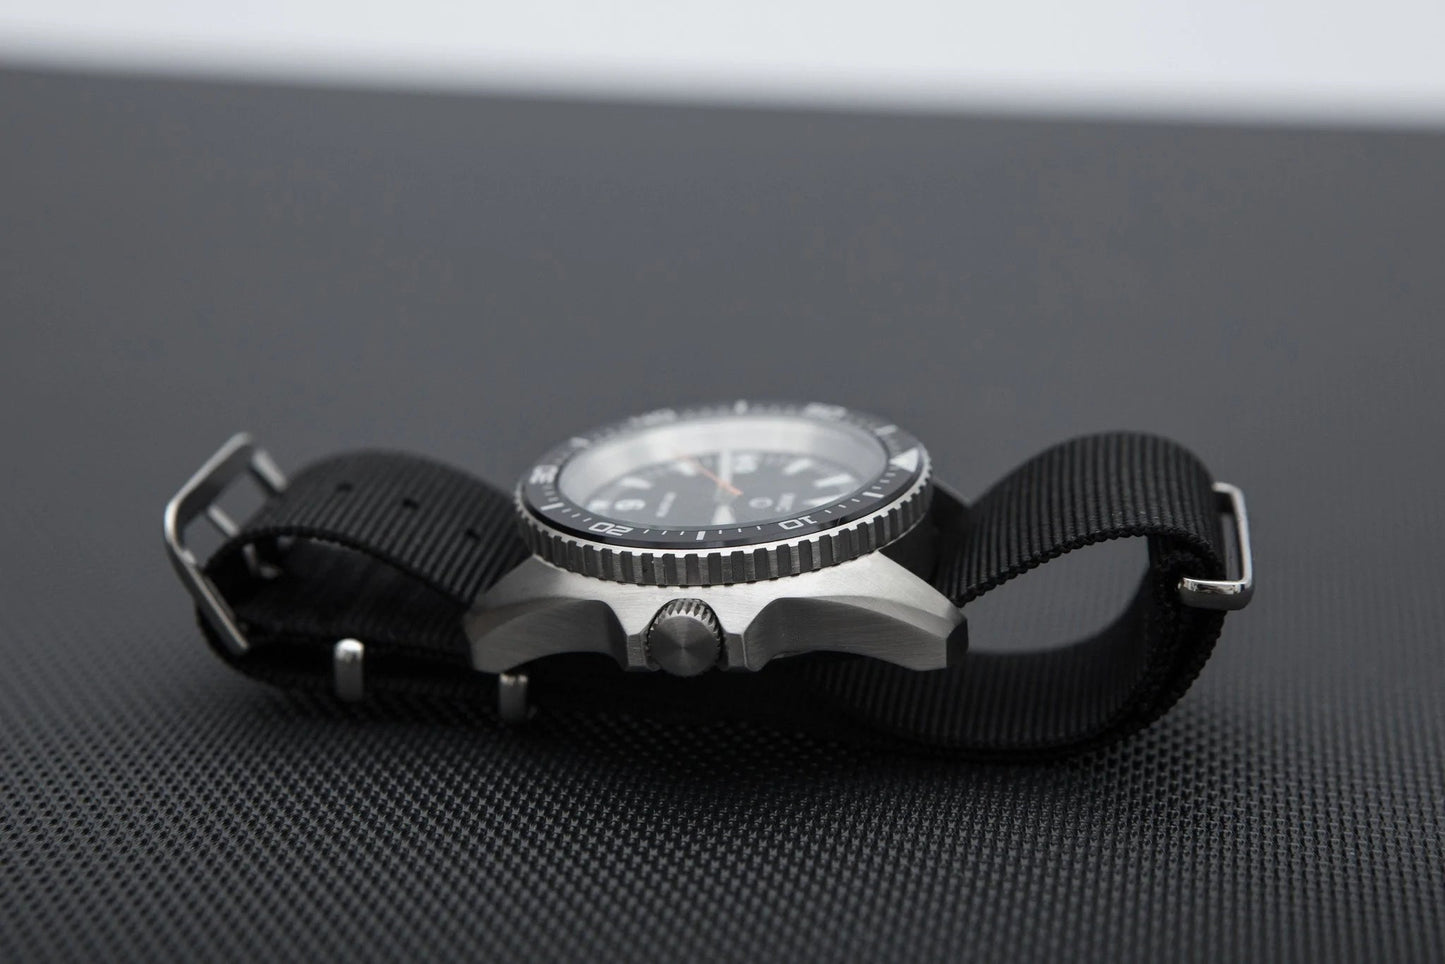 MWC Military Divers Watch in Stainless Steel Case with Sapphire Crystal, Ceramic Bezel and Solid Fixed Strap Bars (Quartz)